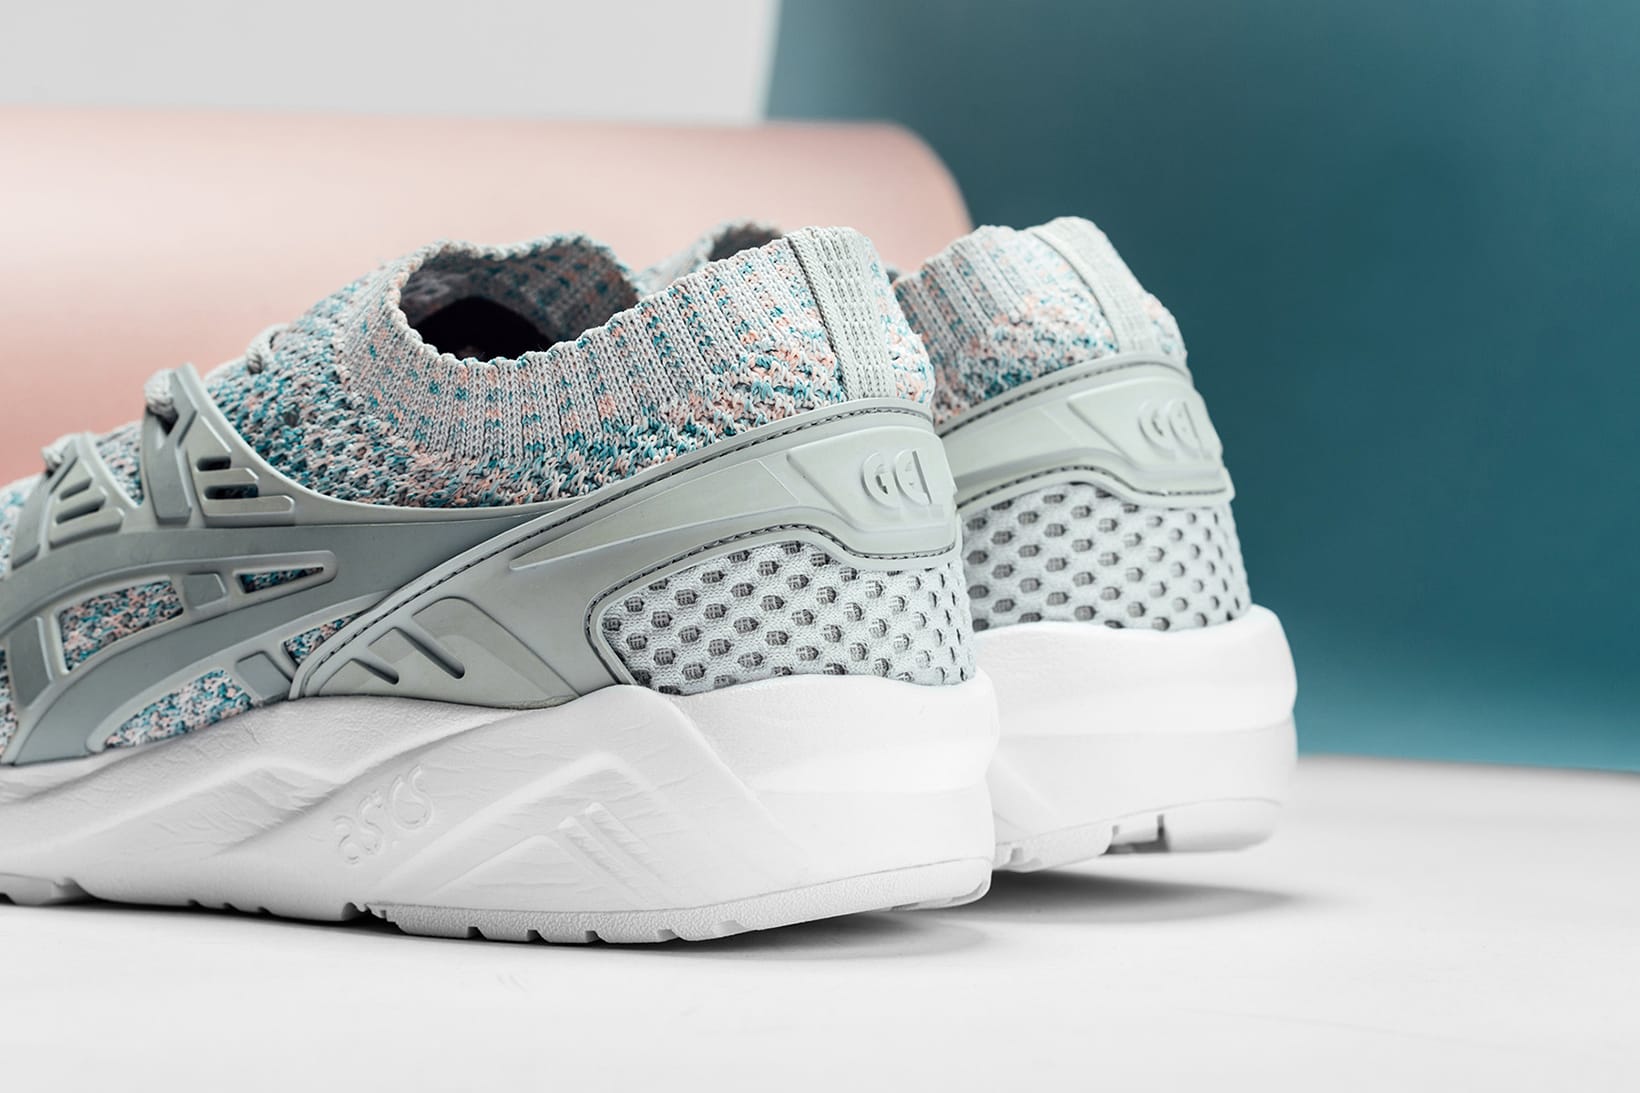 gel kayano trainer knit review